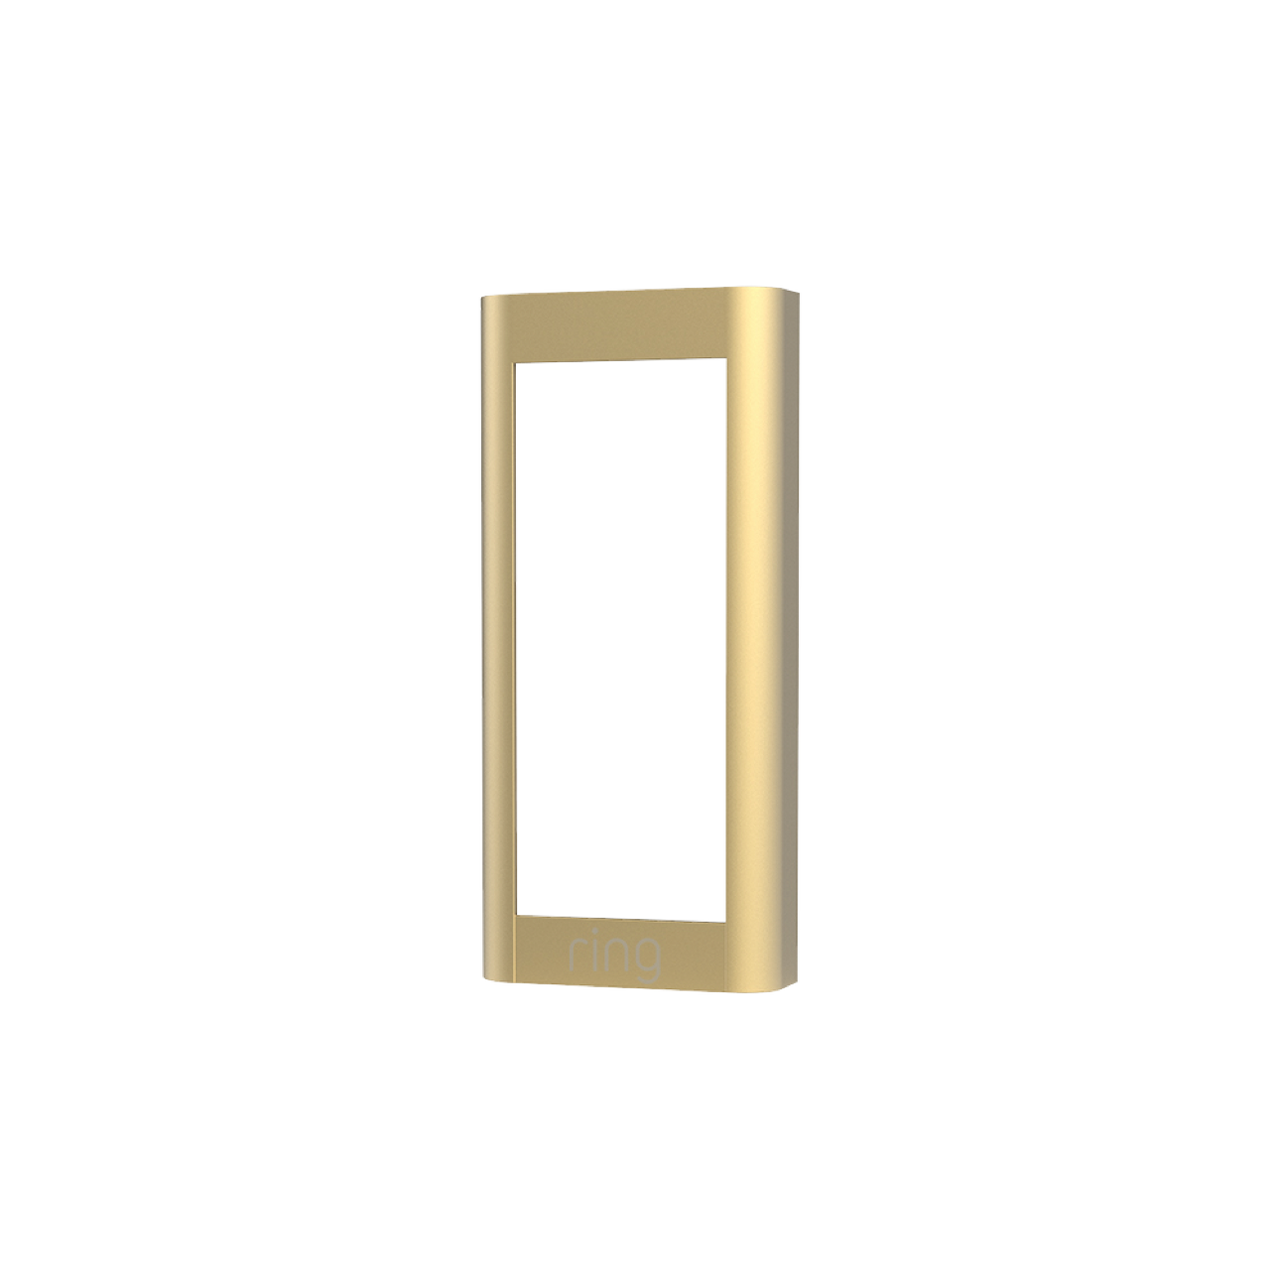 products/GCInterchangeableFaceplate_brushedgold_1029x1029_b99ad630-963e-442a-829d-eb9c2636e18d.png